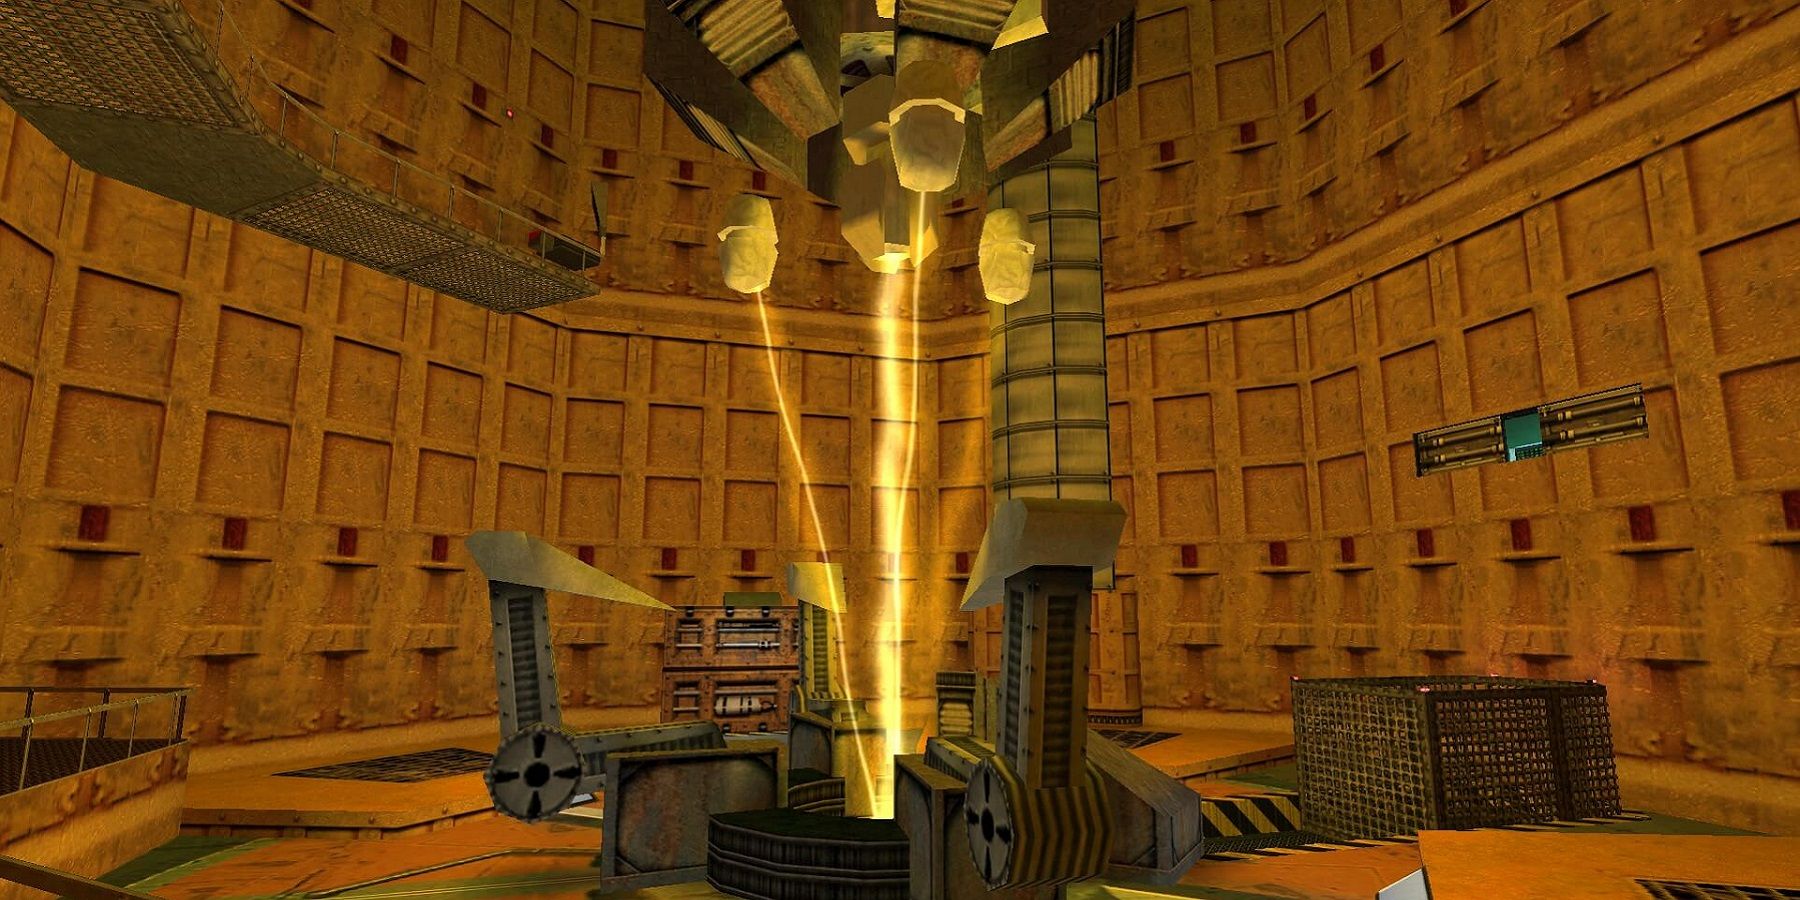 Image from the original Half-Life showing the activated test chamber at the start.